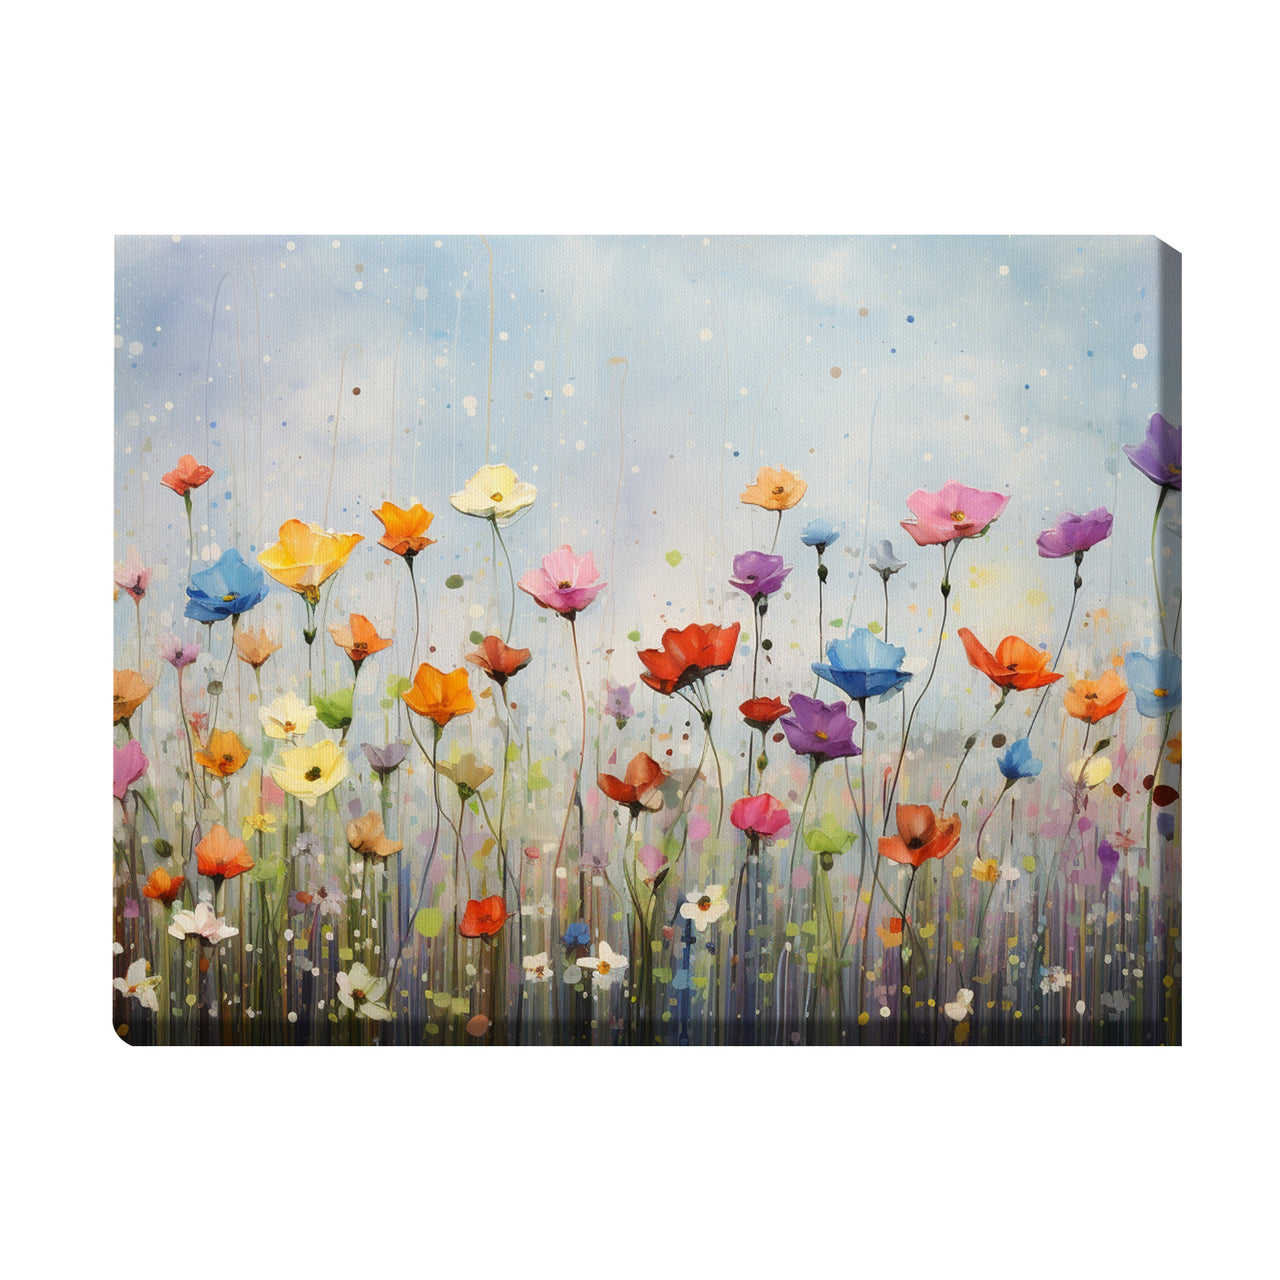 Wildflowers on Canvas, Flowers in Rain 01, Minimalist Flower Wall Art, Abstract Wall Art, Watercolor flowers, Floral Print, Classic, Rustic Farmhouse, Wildflower Home Decor, Flower Painting Canvas, Floral Wall Art